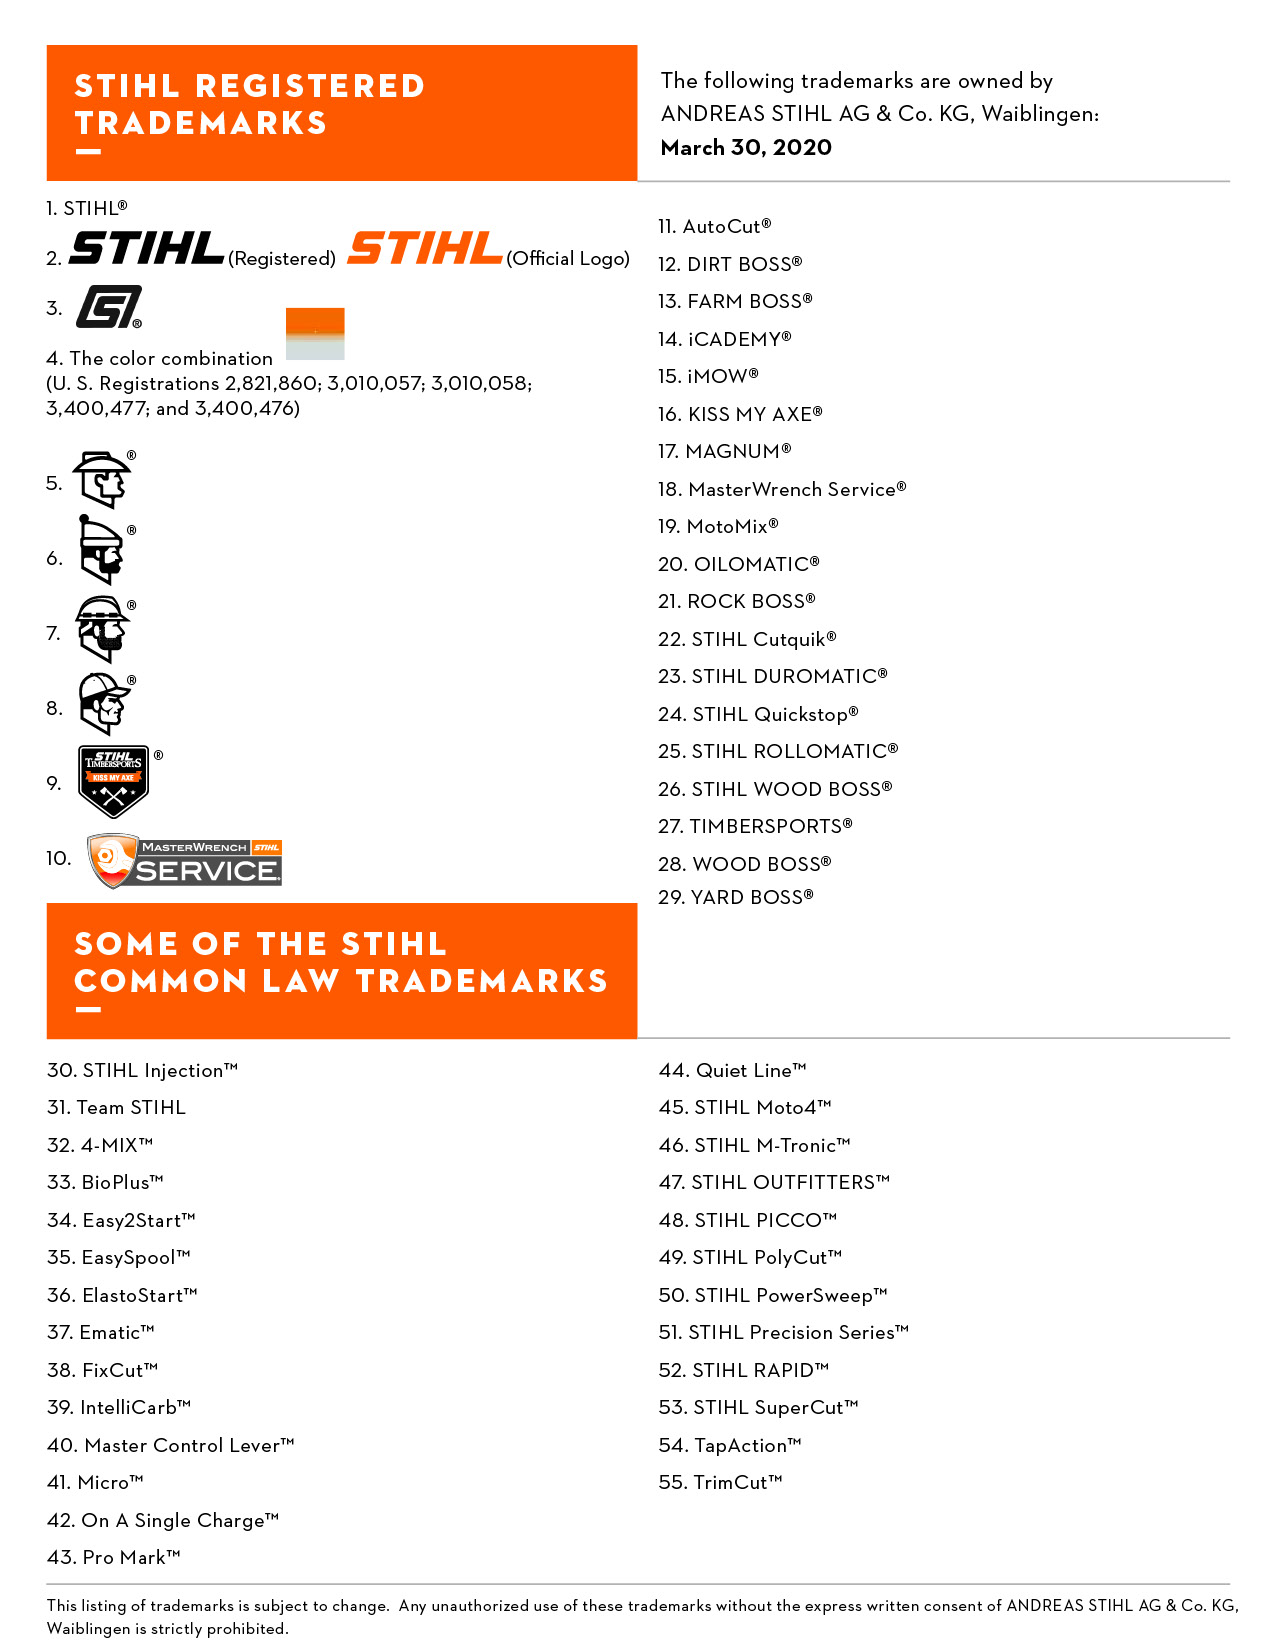 Image of the STIHL Registered Trademark and Common Law List